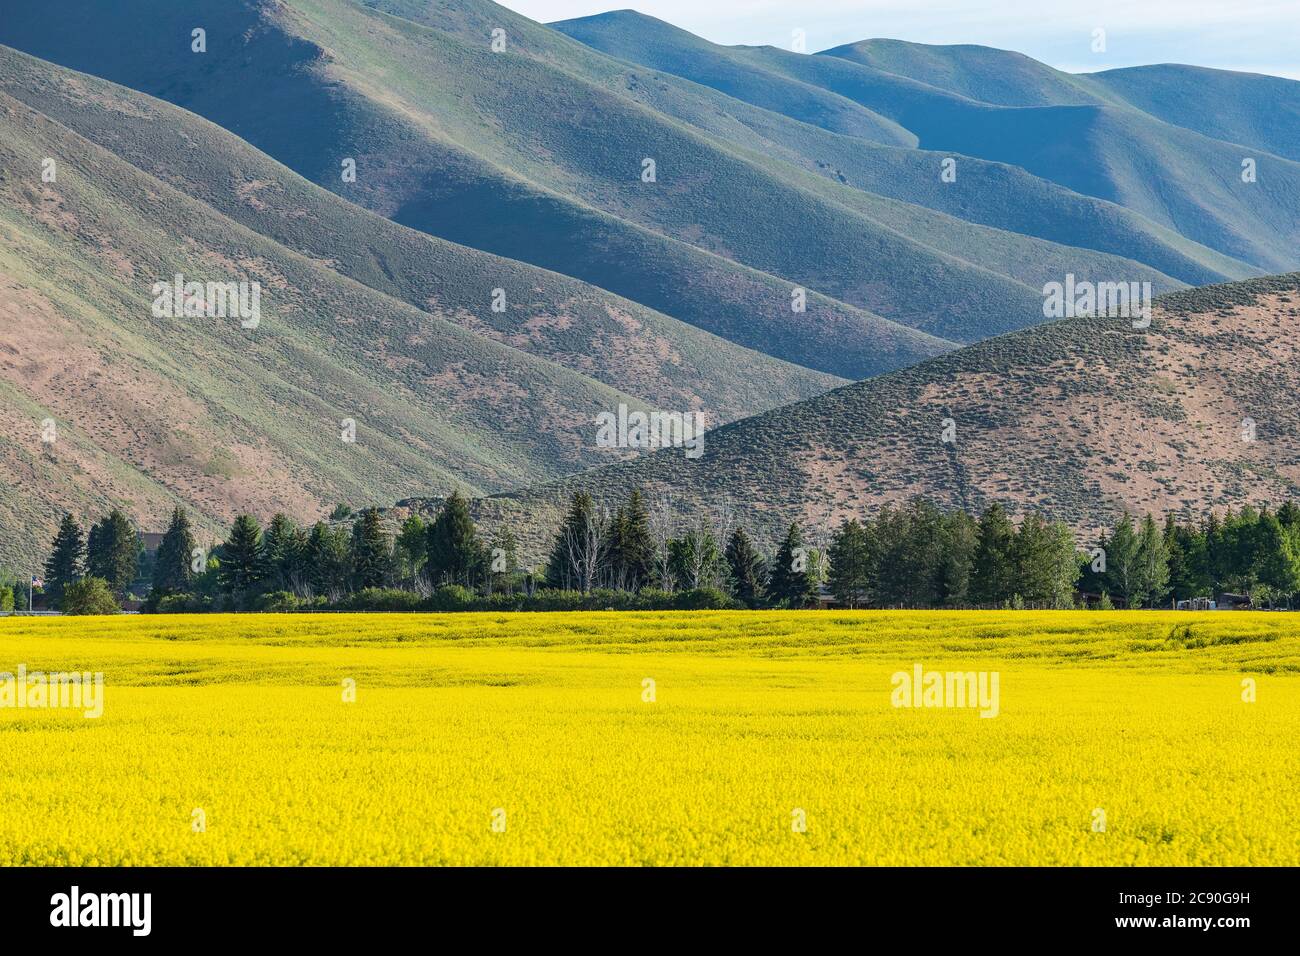 USA, Field of mustard and hills Stock Photo